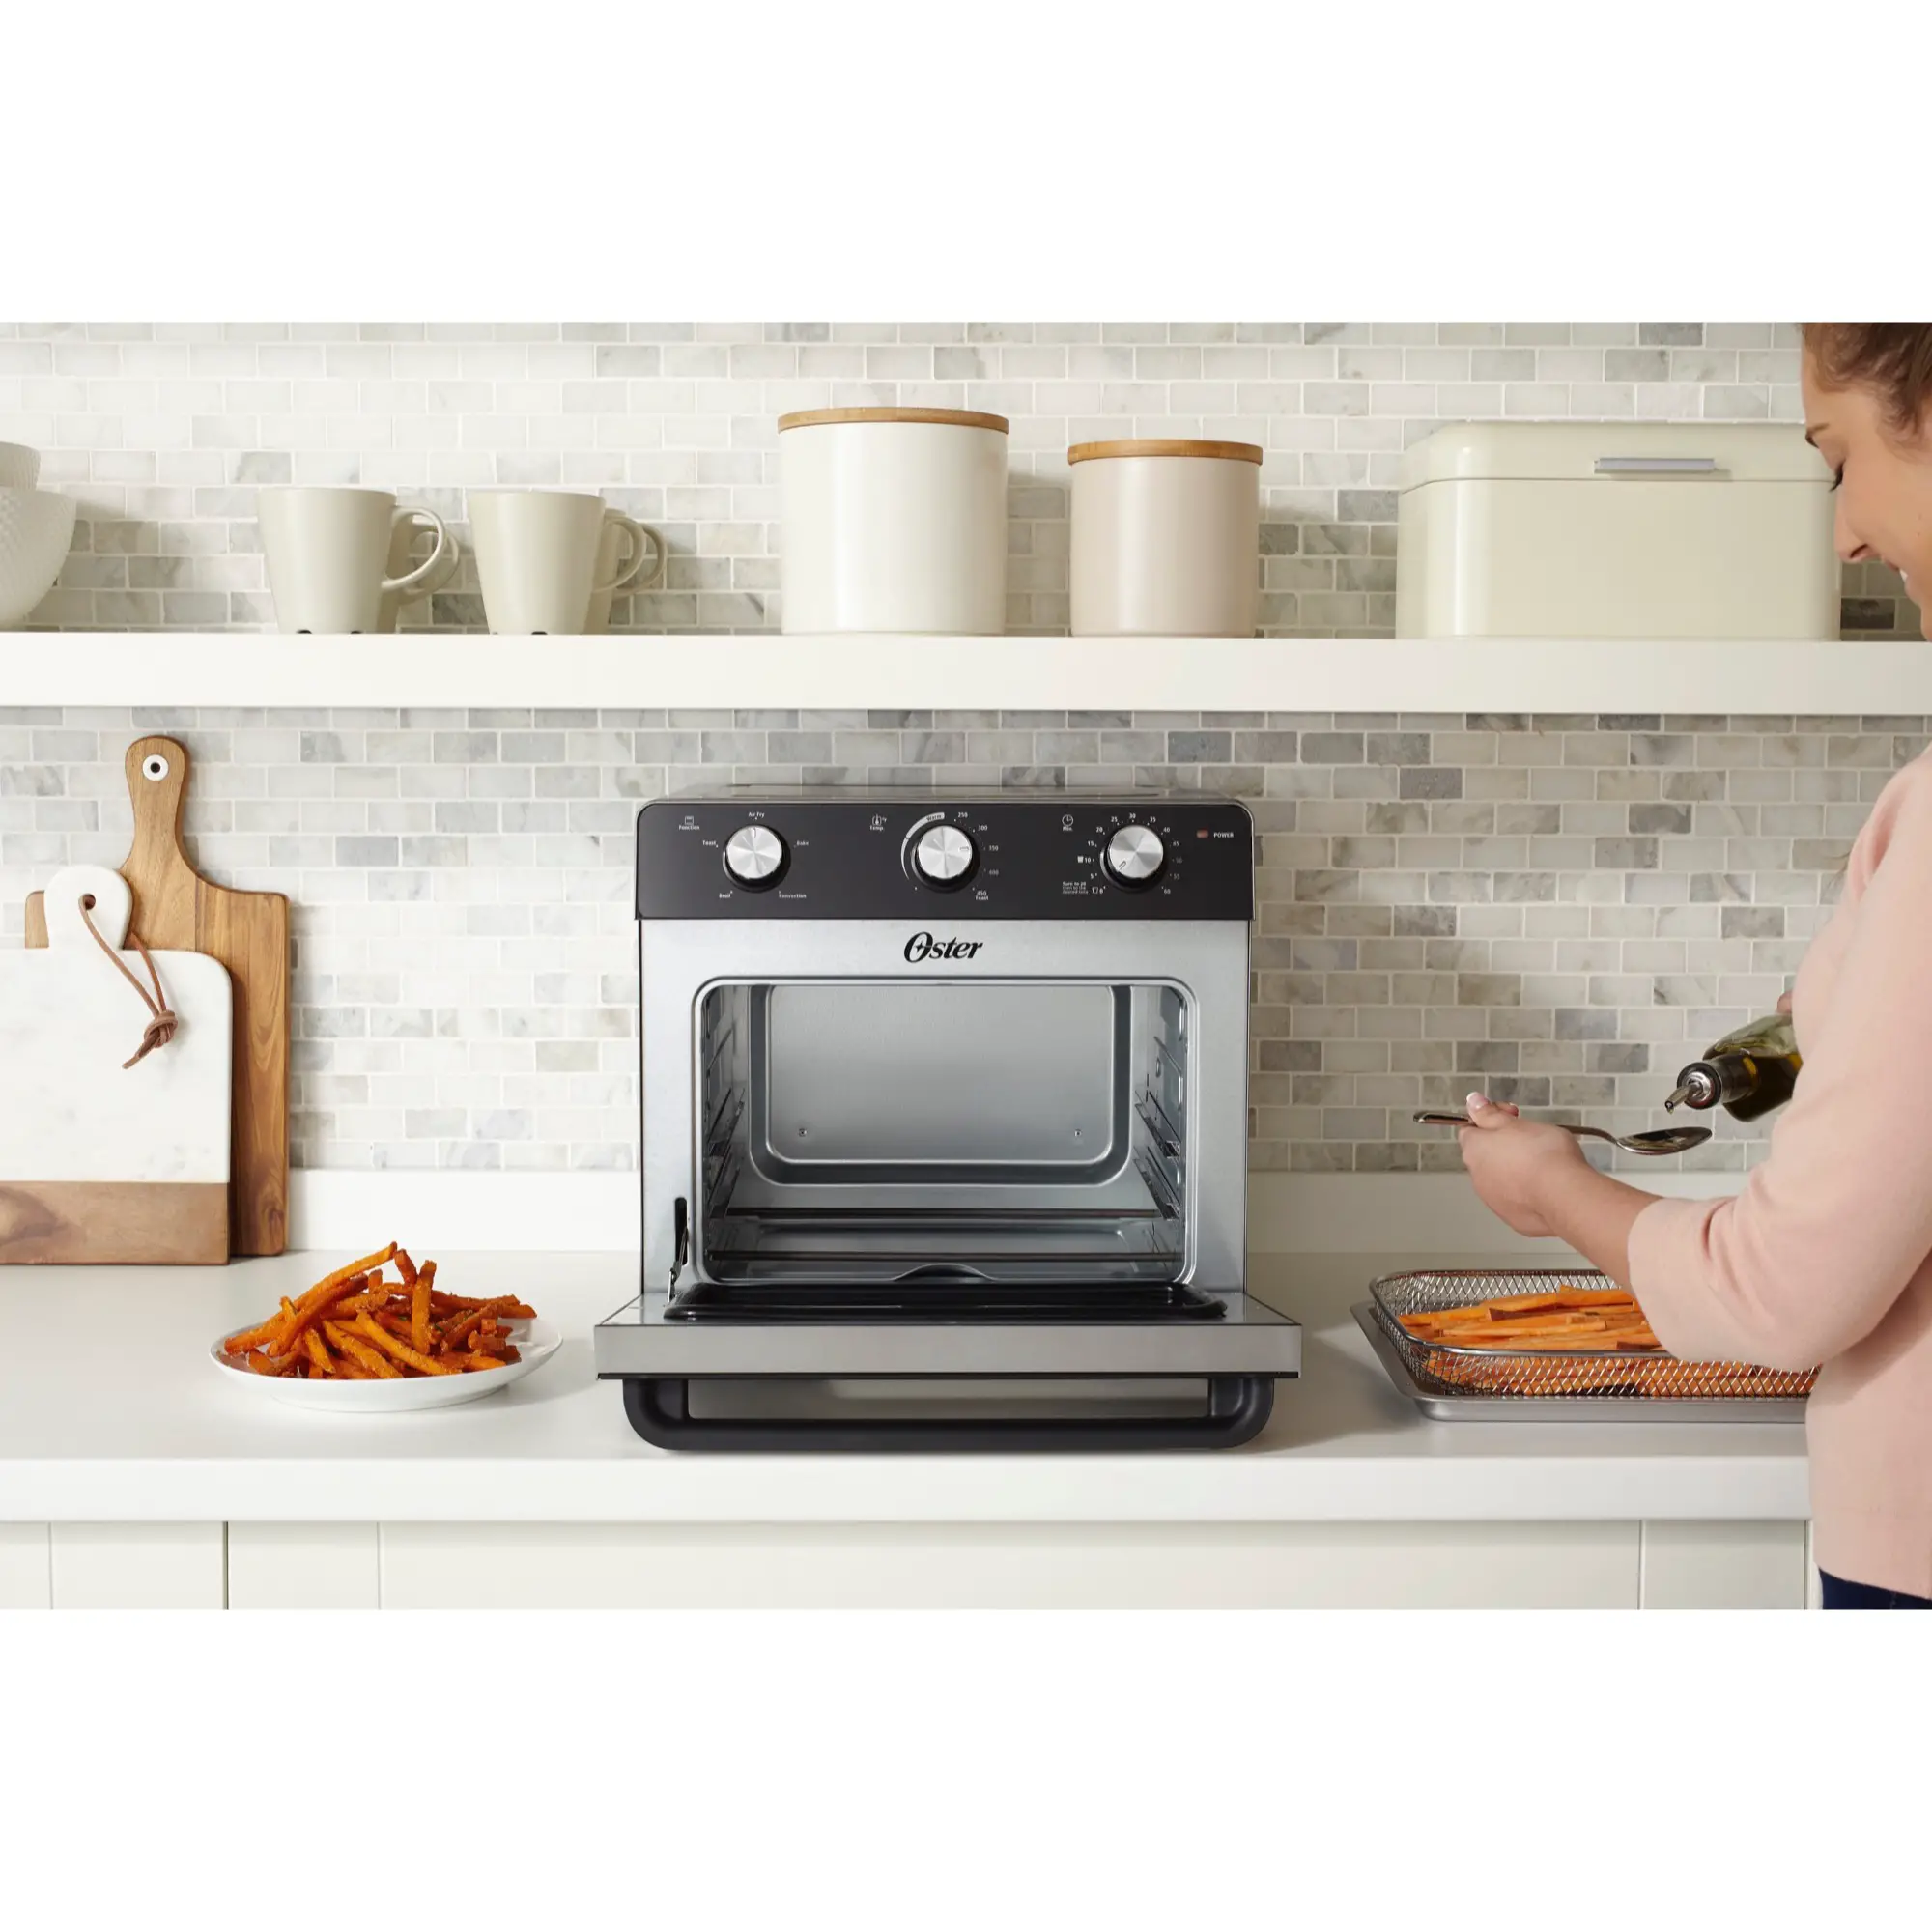 Oster Countertop Toaster Oven with Air Fryer, Black